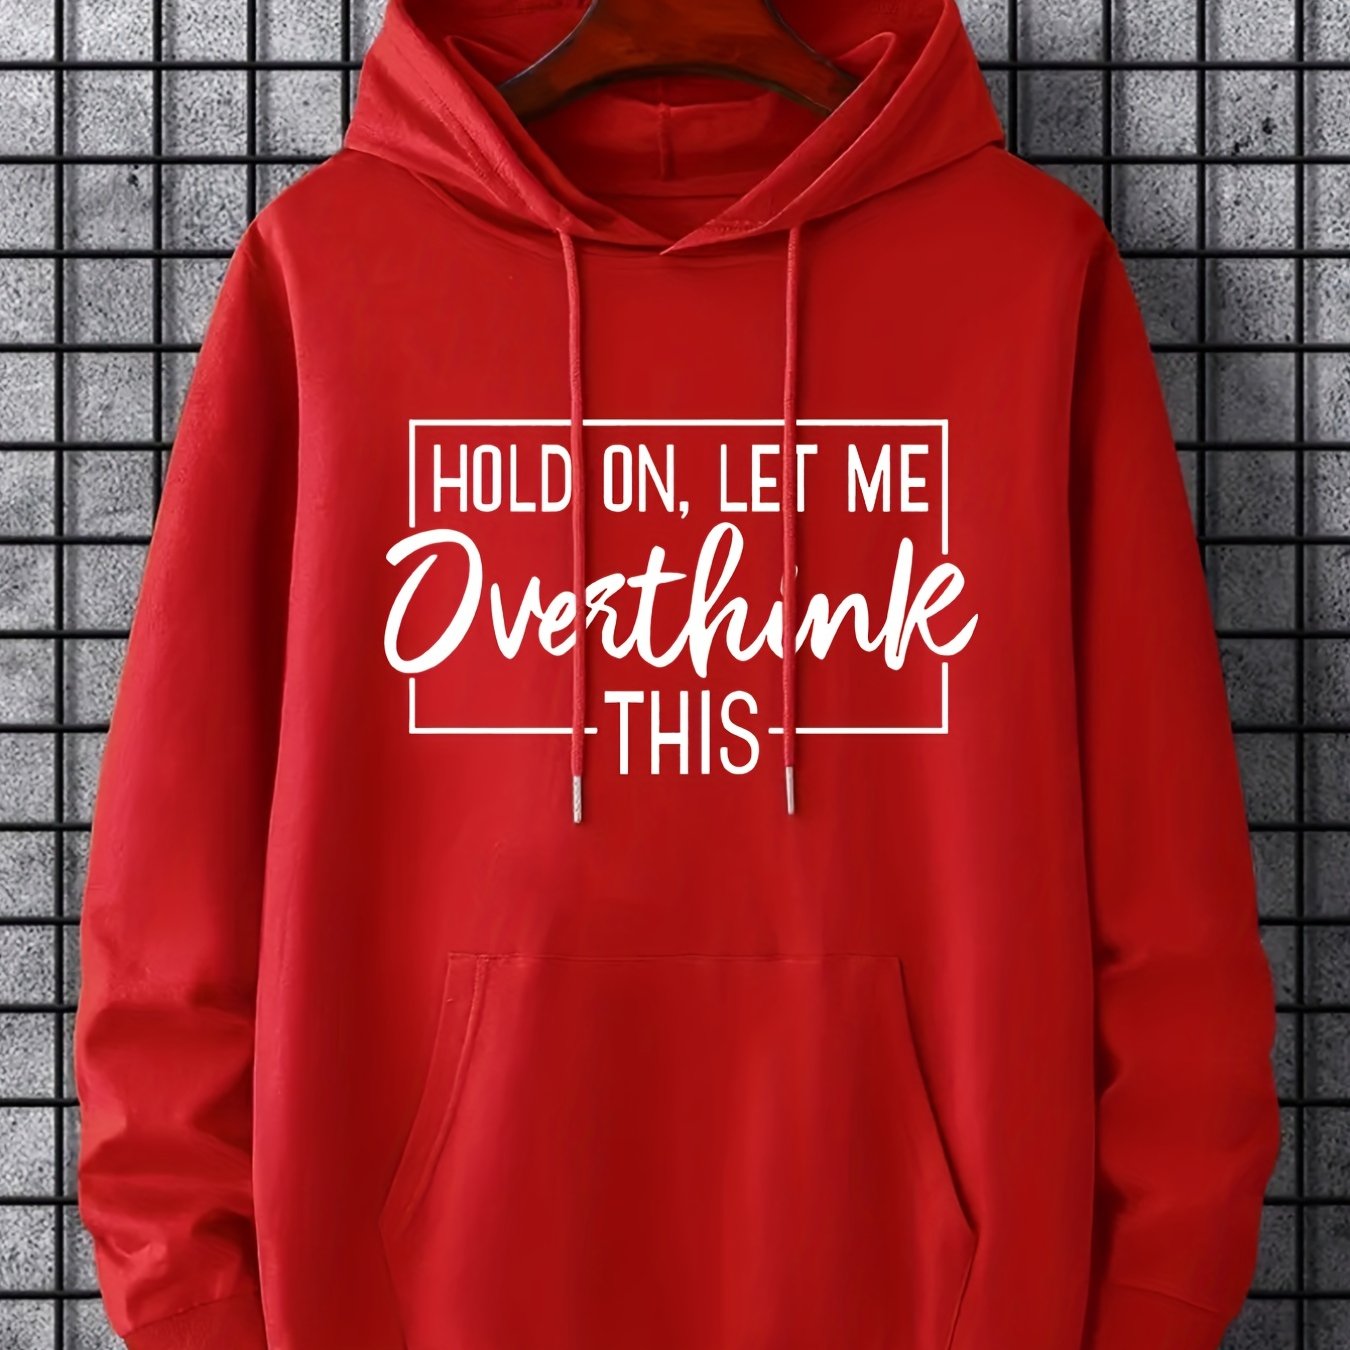 Hoodies For Men, Funny 'Overthink' Print Hoodie, Men's Casual Pullover Hooded Sweatshirt With Kangaroo Pocket For Spring Fall, As Gifts